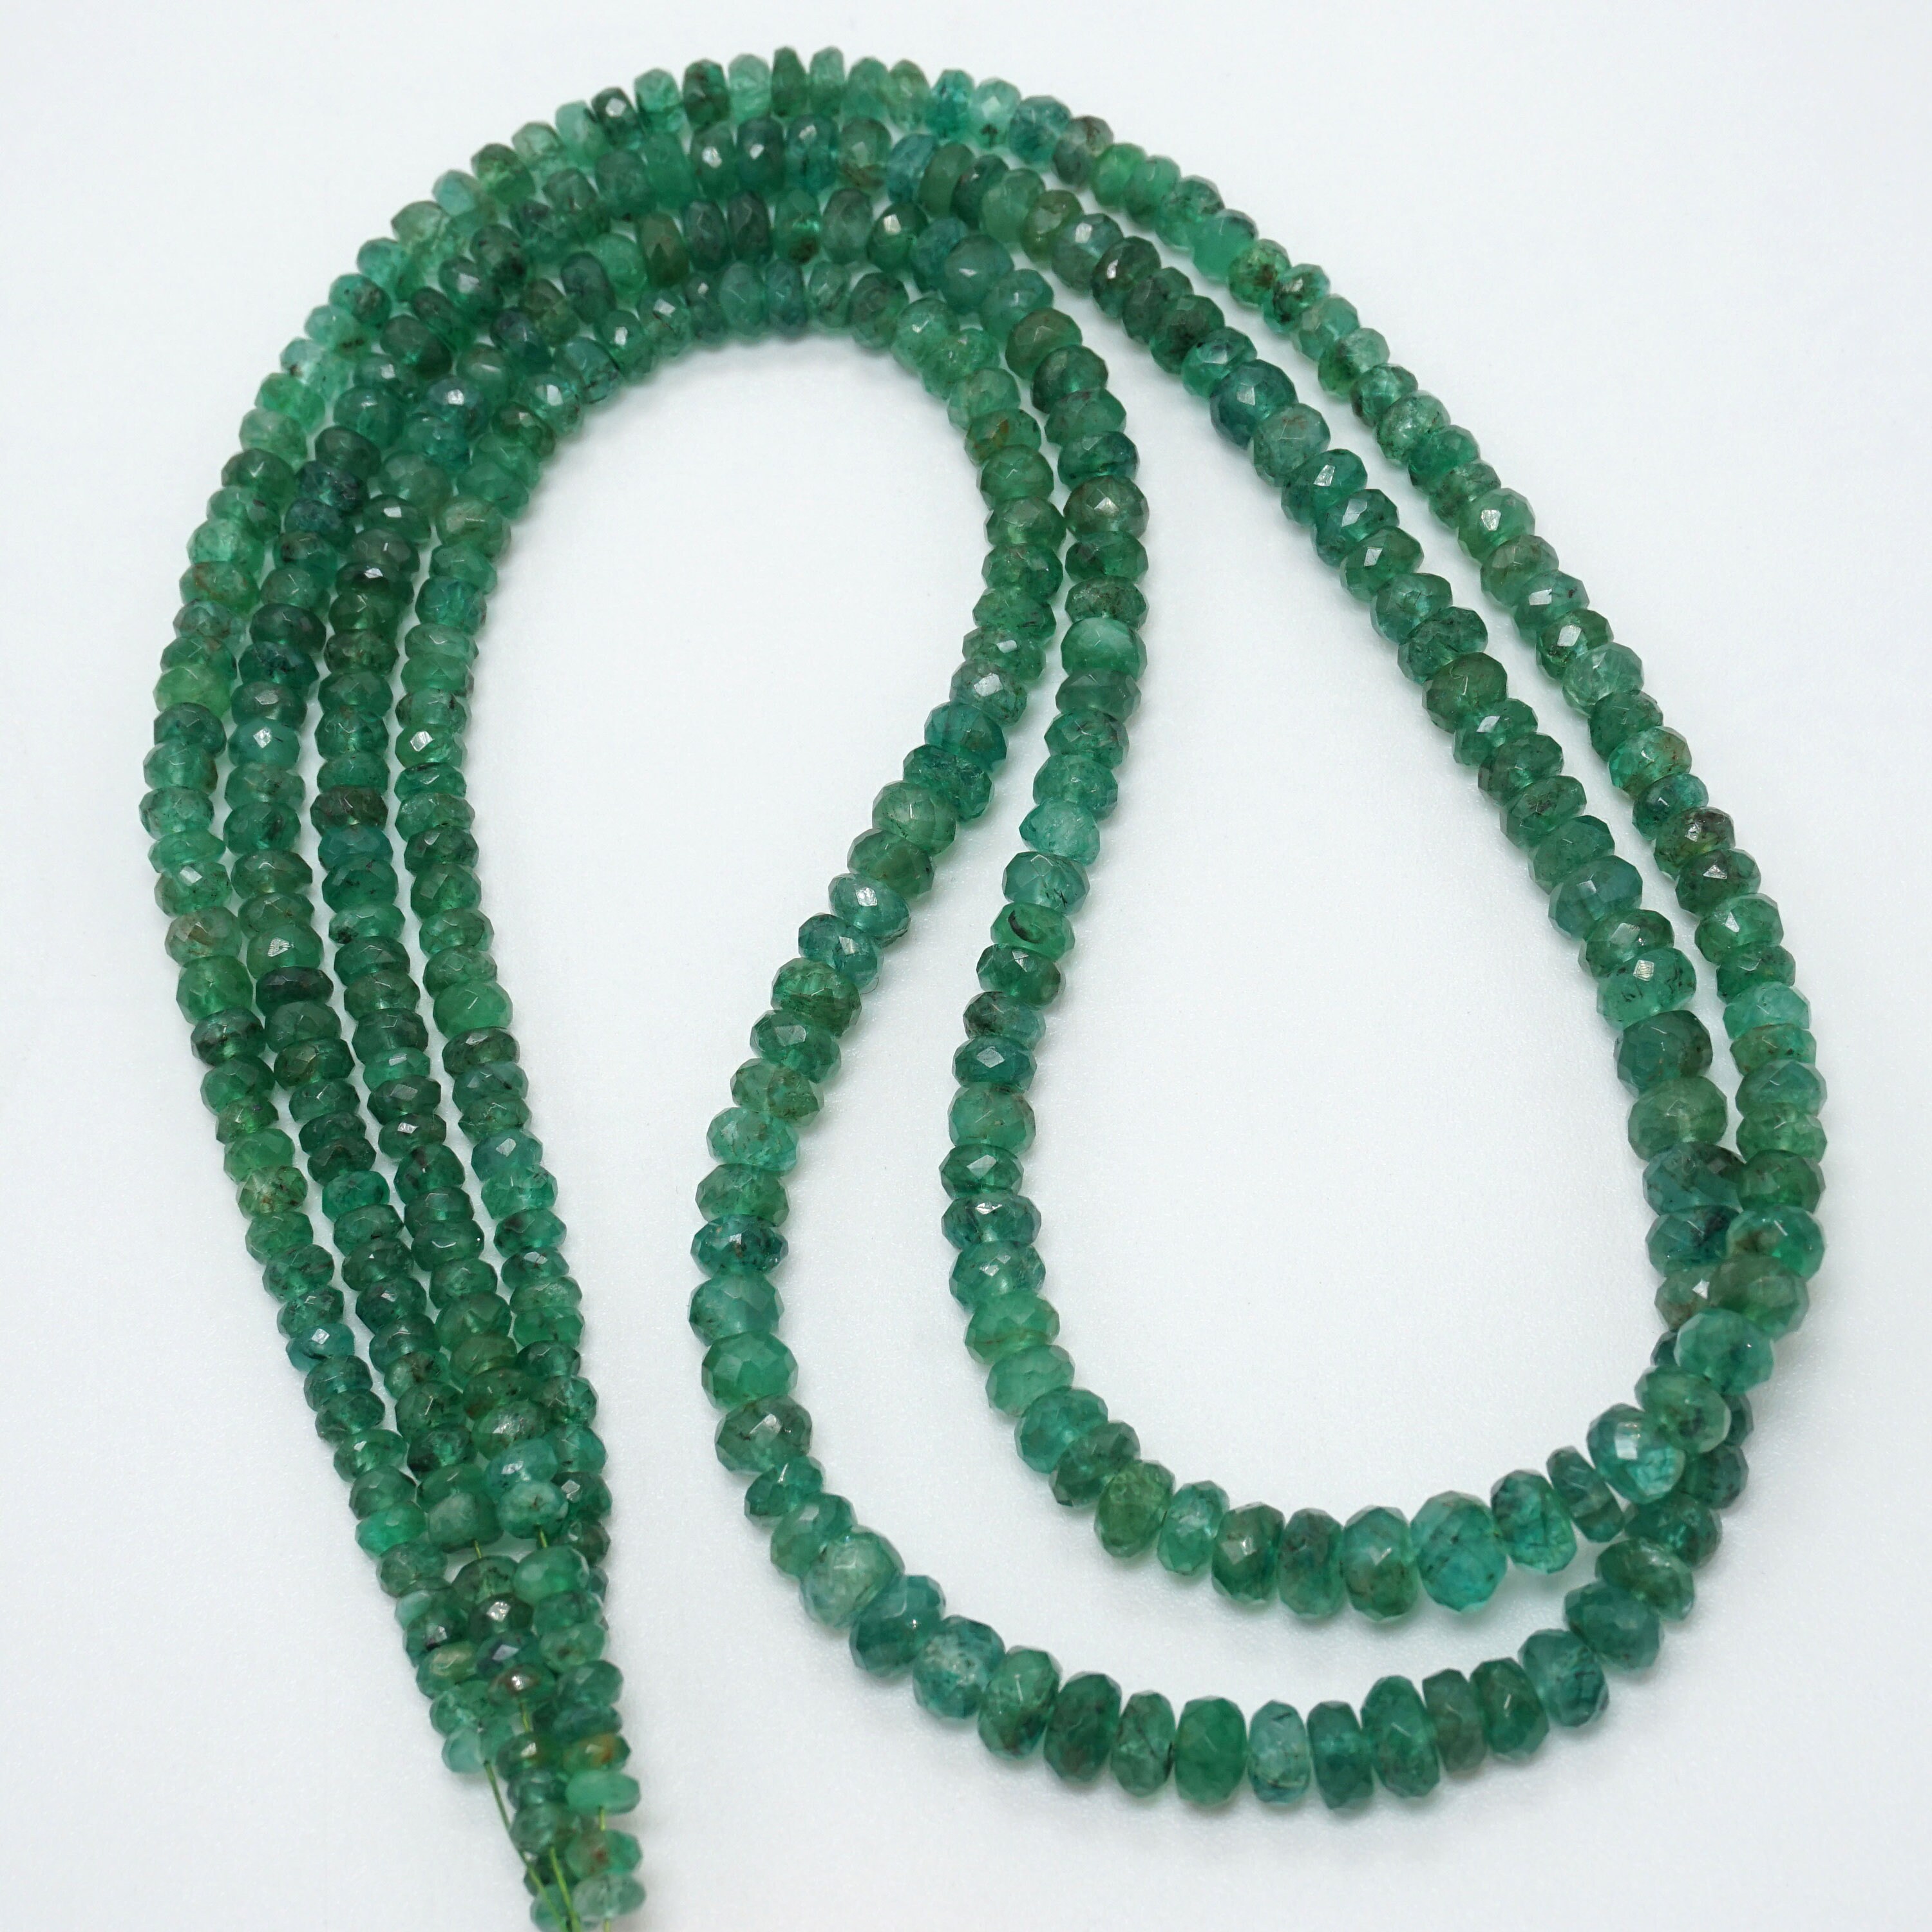 Natural Emerald Faceted Rondelle Beads 3.2 mm to 5.5 mm | Etsy